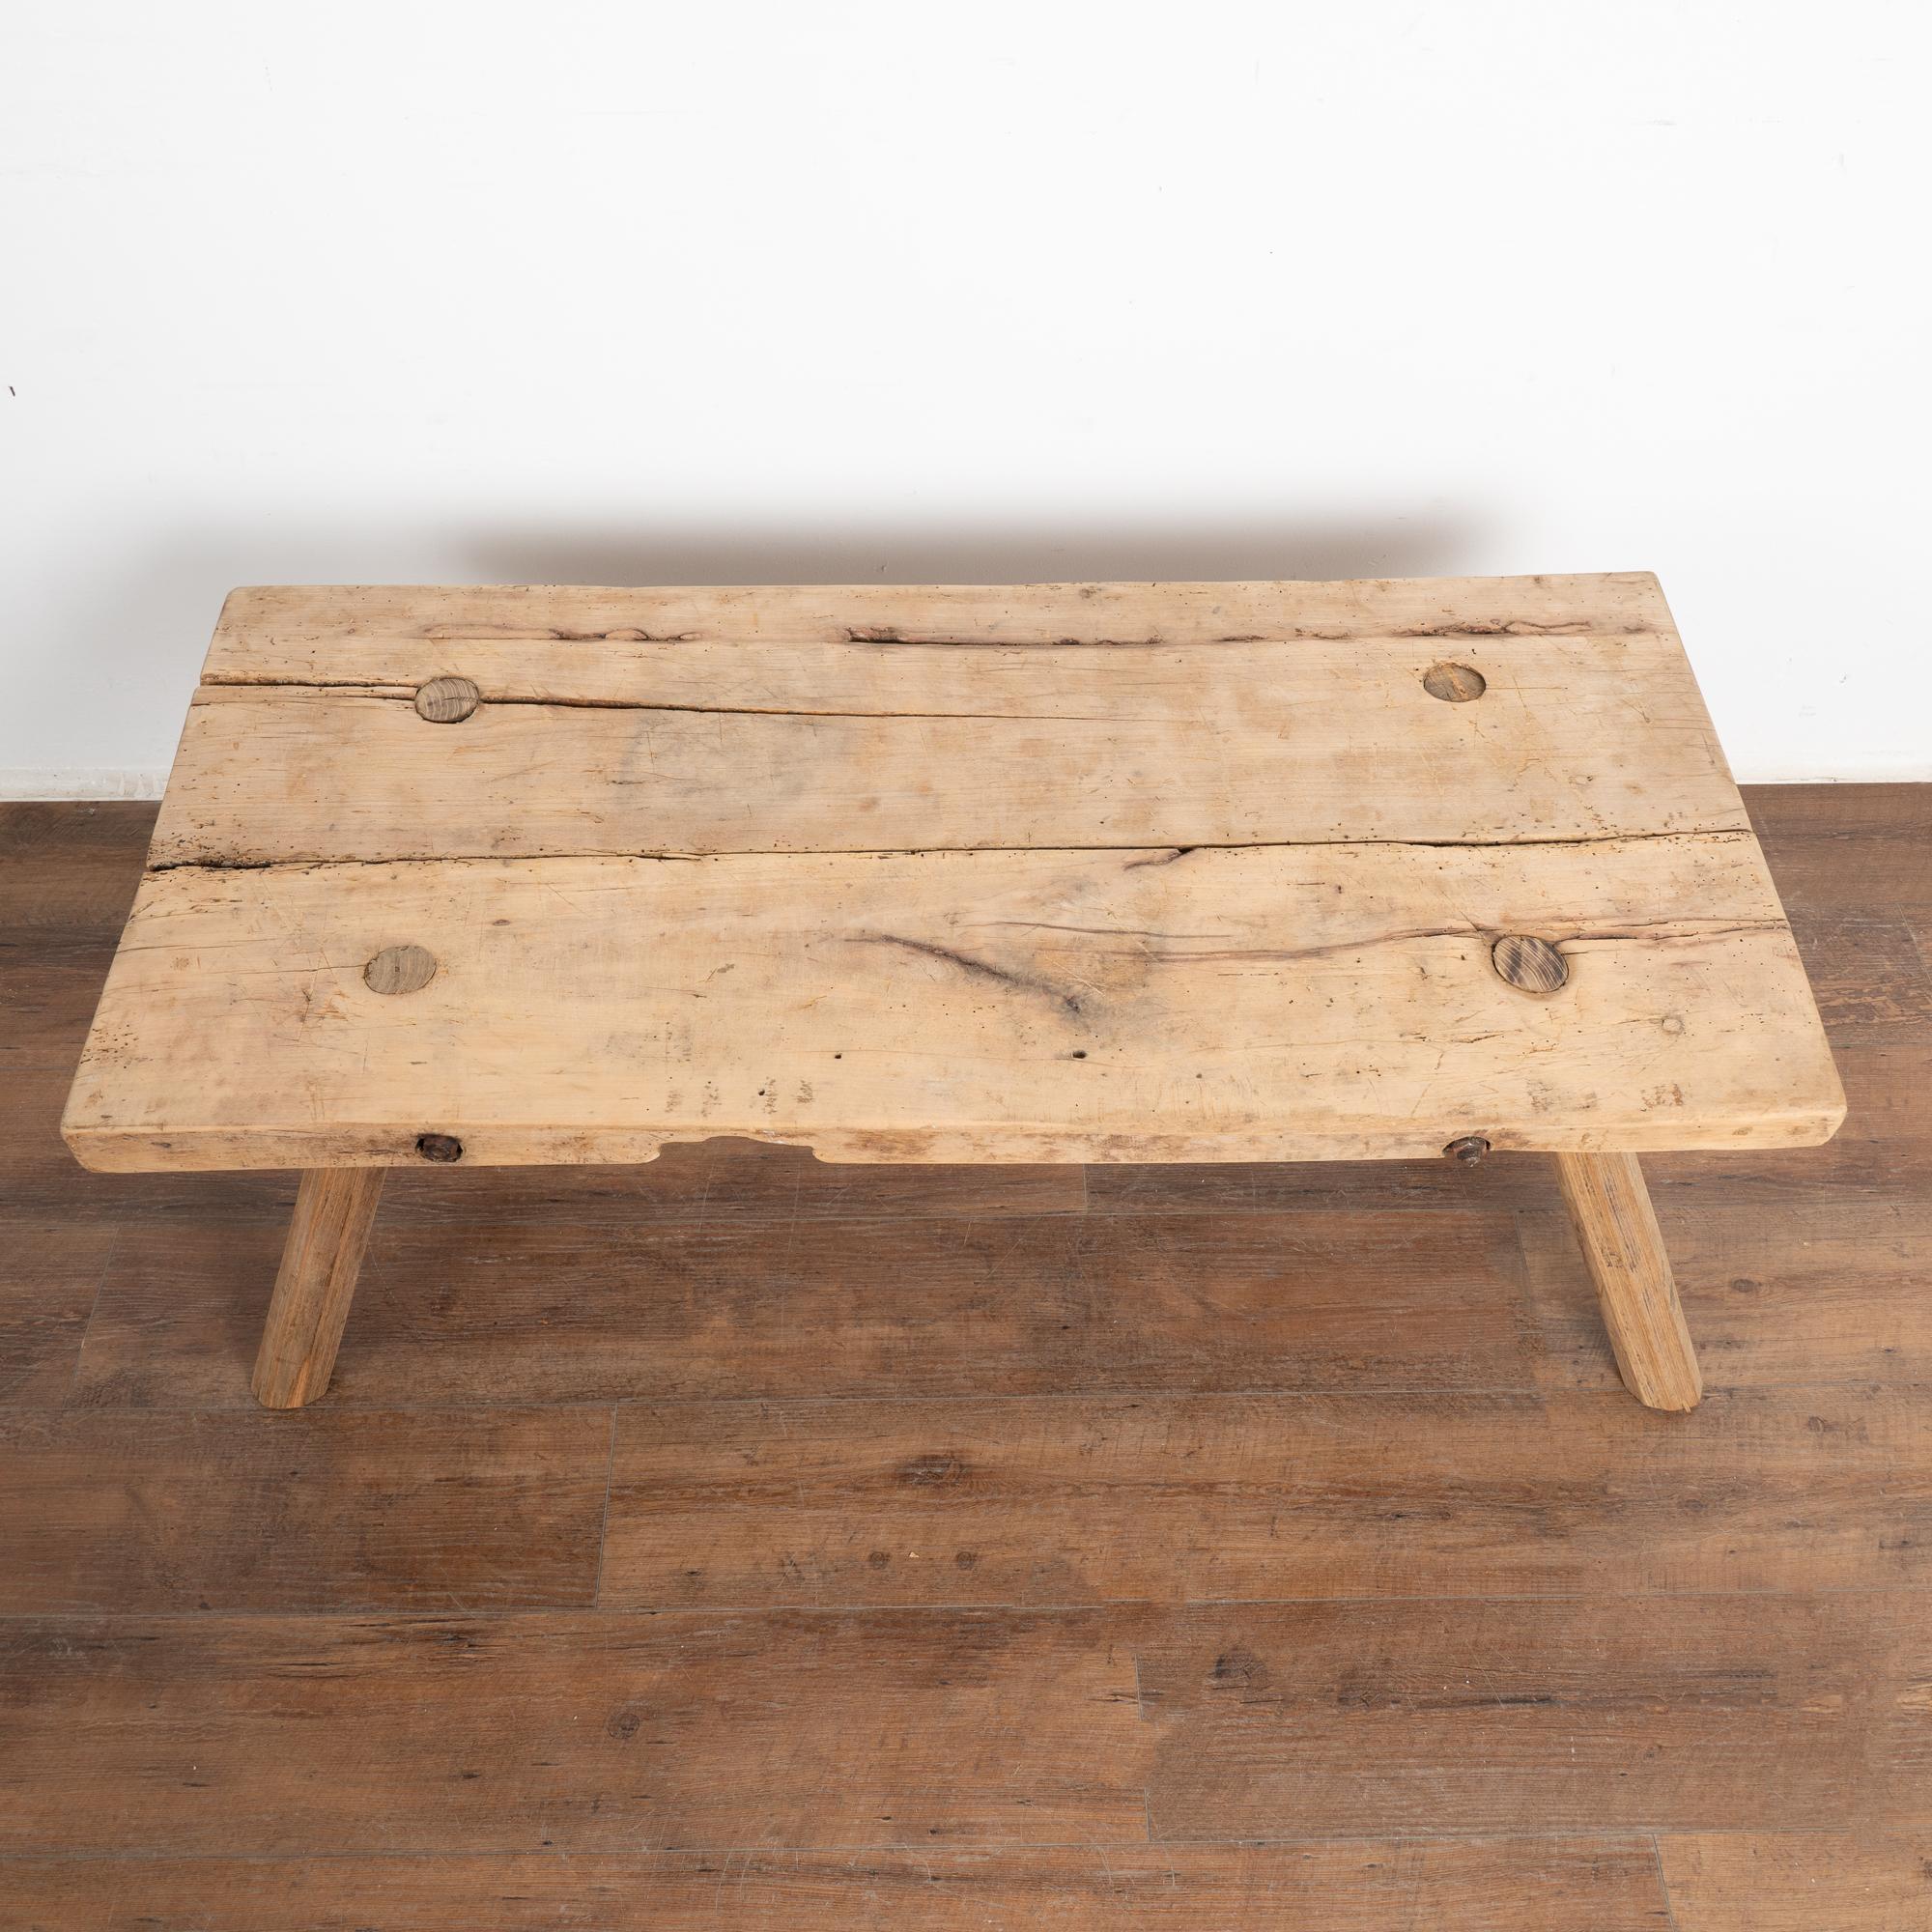 Rustic Coffee Table With Iron Bolts, Hungary circa 1890 For Sale 2